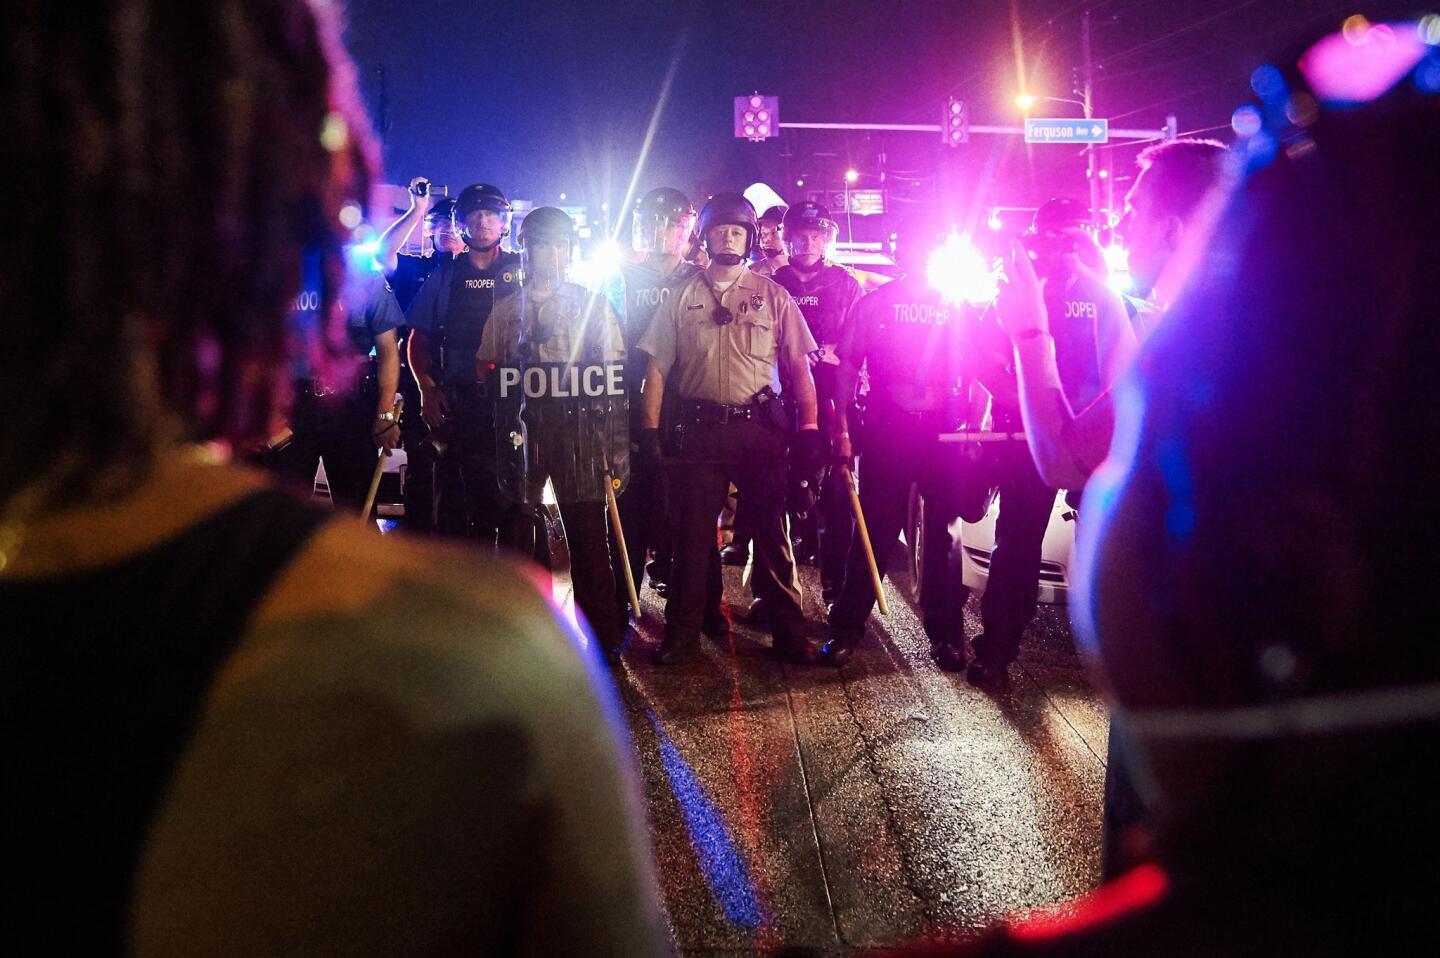 St. Louis County police and Missouri State Highway Patrol troopers stand guard as protesters (foreground) march on West Florissant Avenue in Ferguson, Mo., on Aug. 9, 2015.